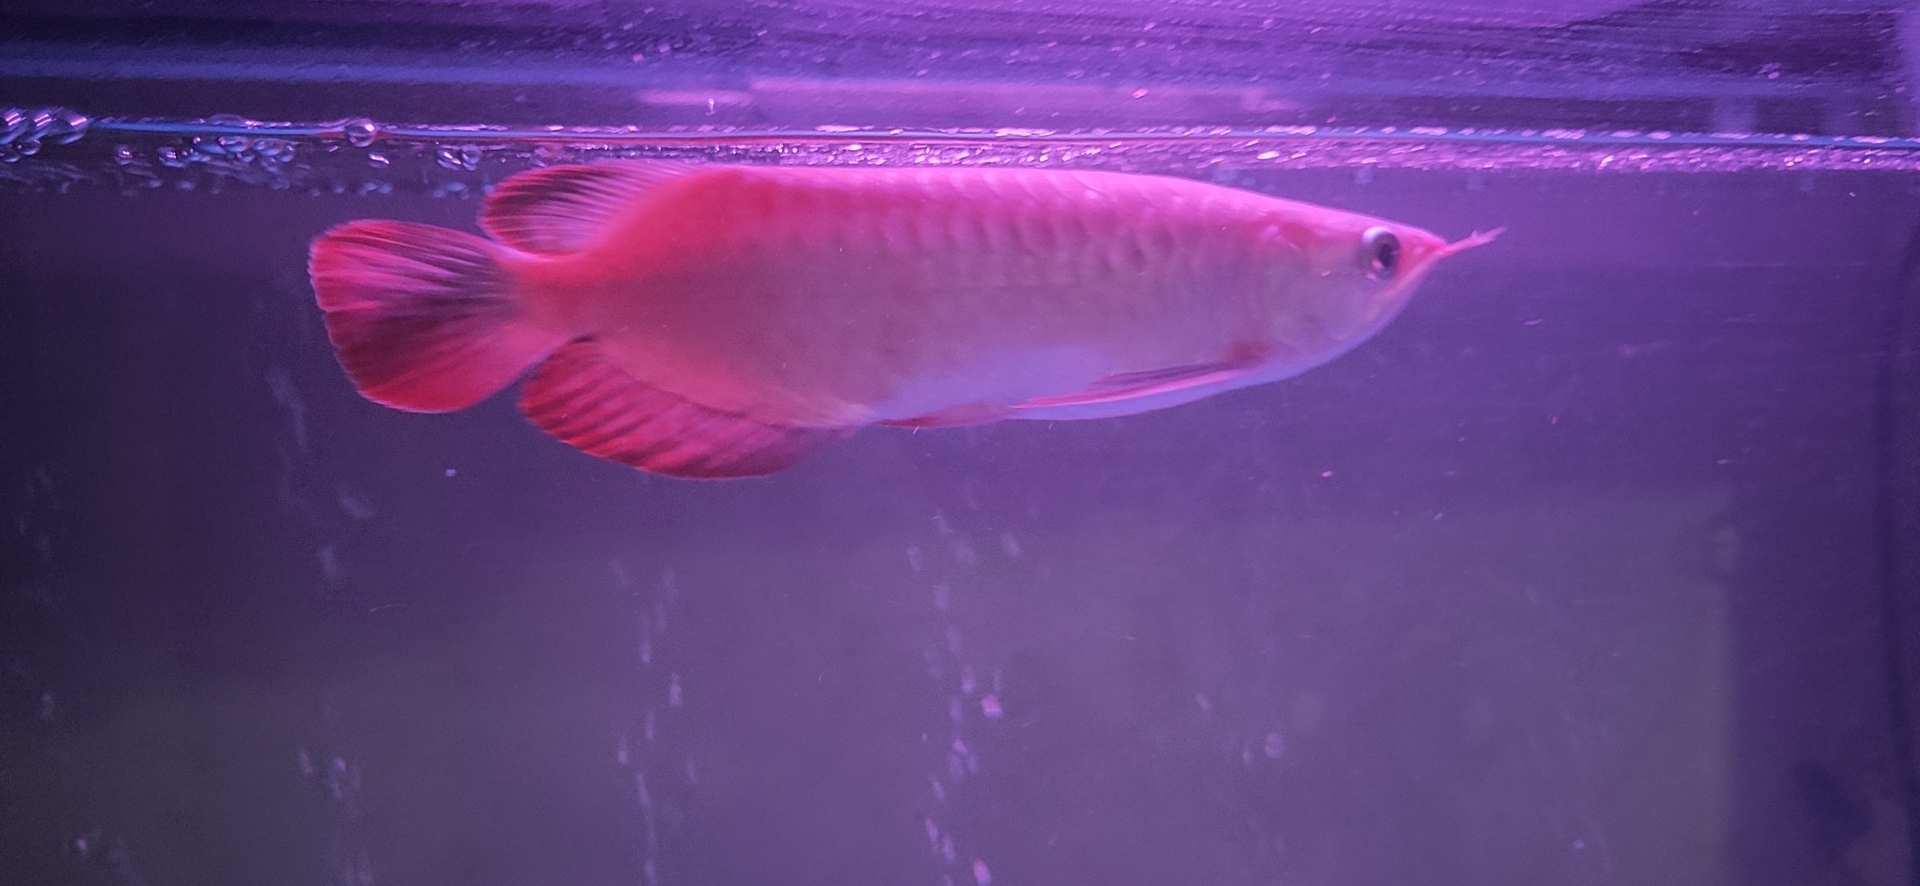 Stingray What kind of feed to eat 24k Golden Arowana ASIAN AROWANA,AROWANA,STINGRAY The1sheet